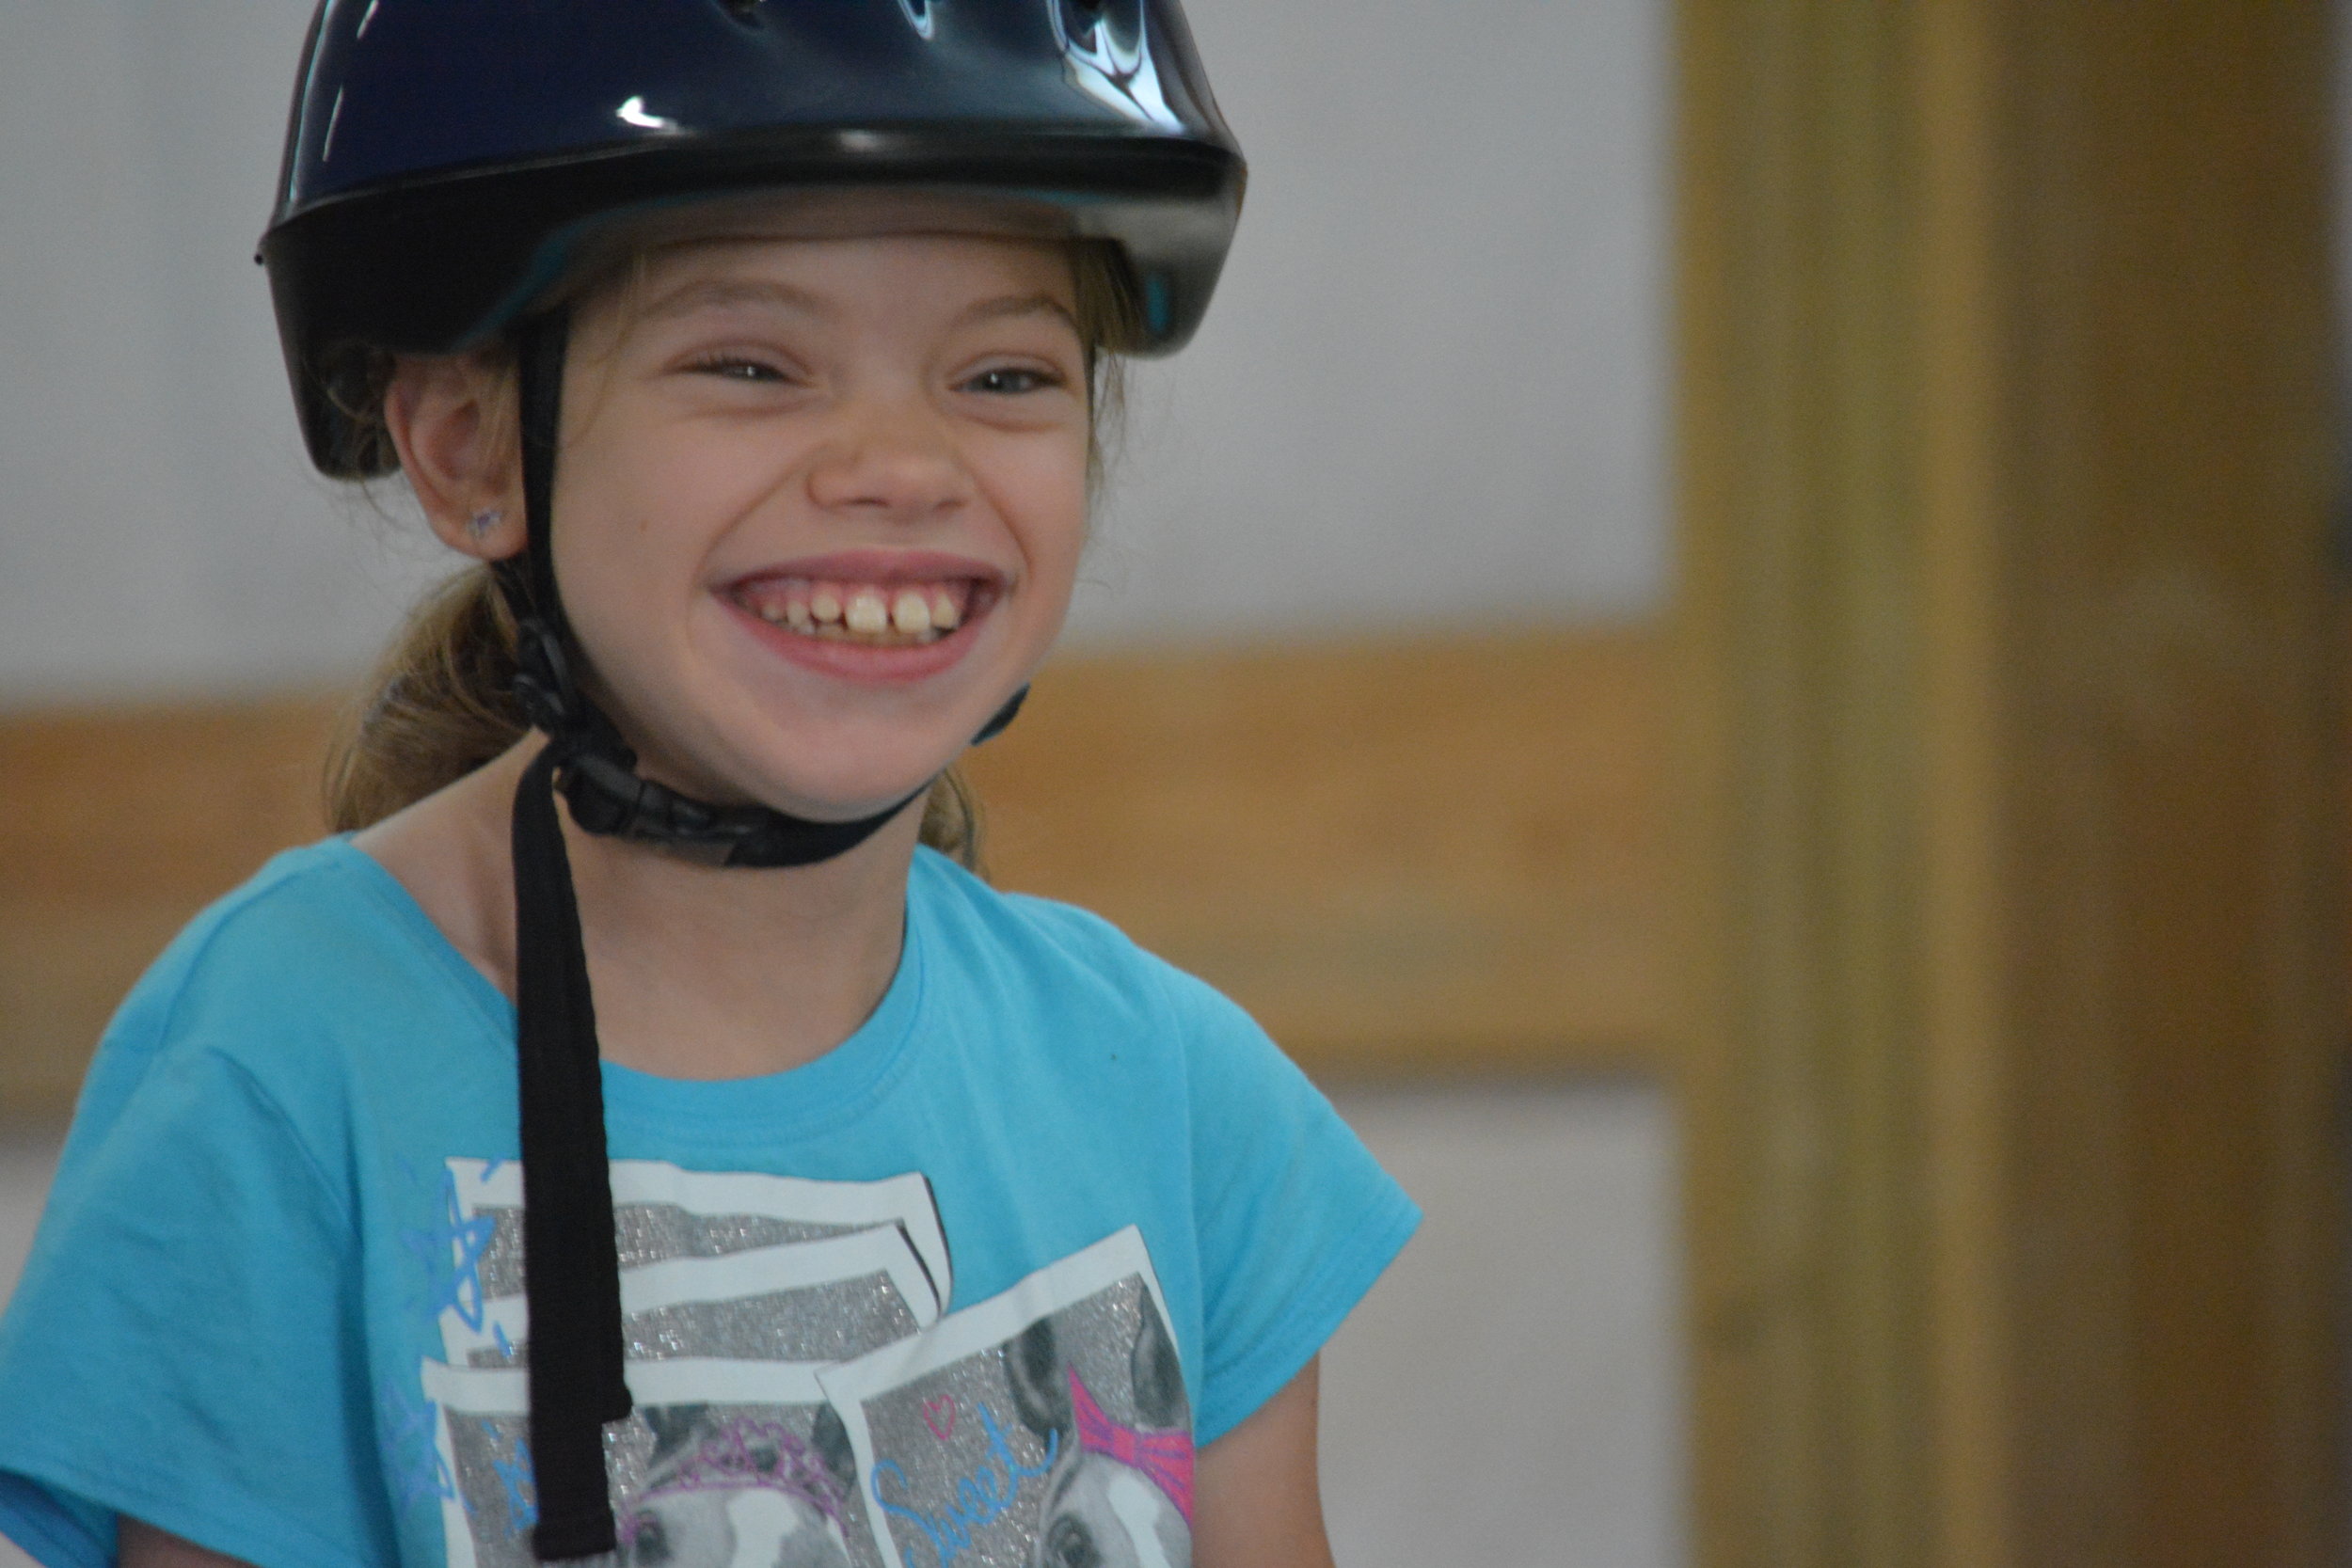   An up-close photo of a white girl, wearing a helmet, smiling.  